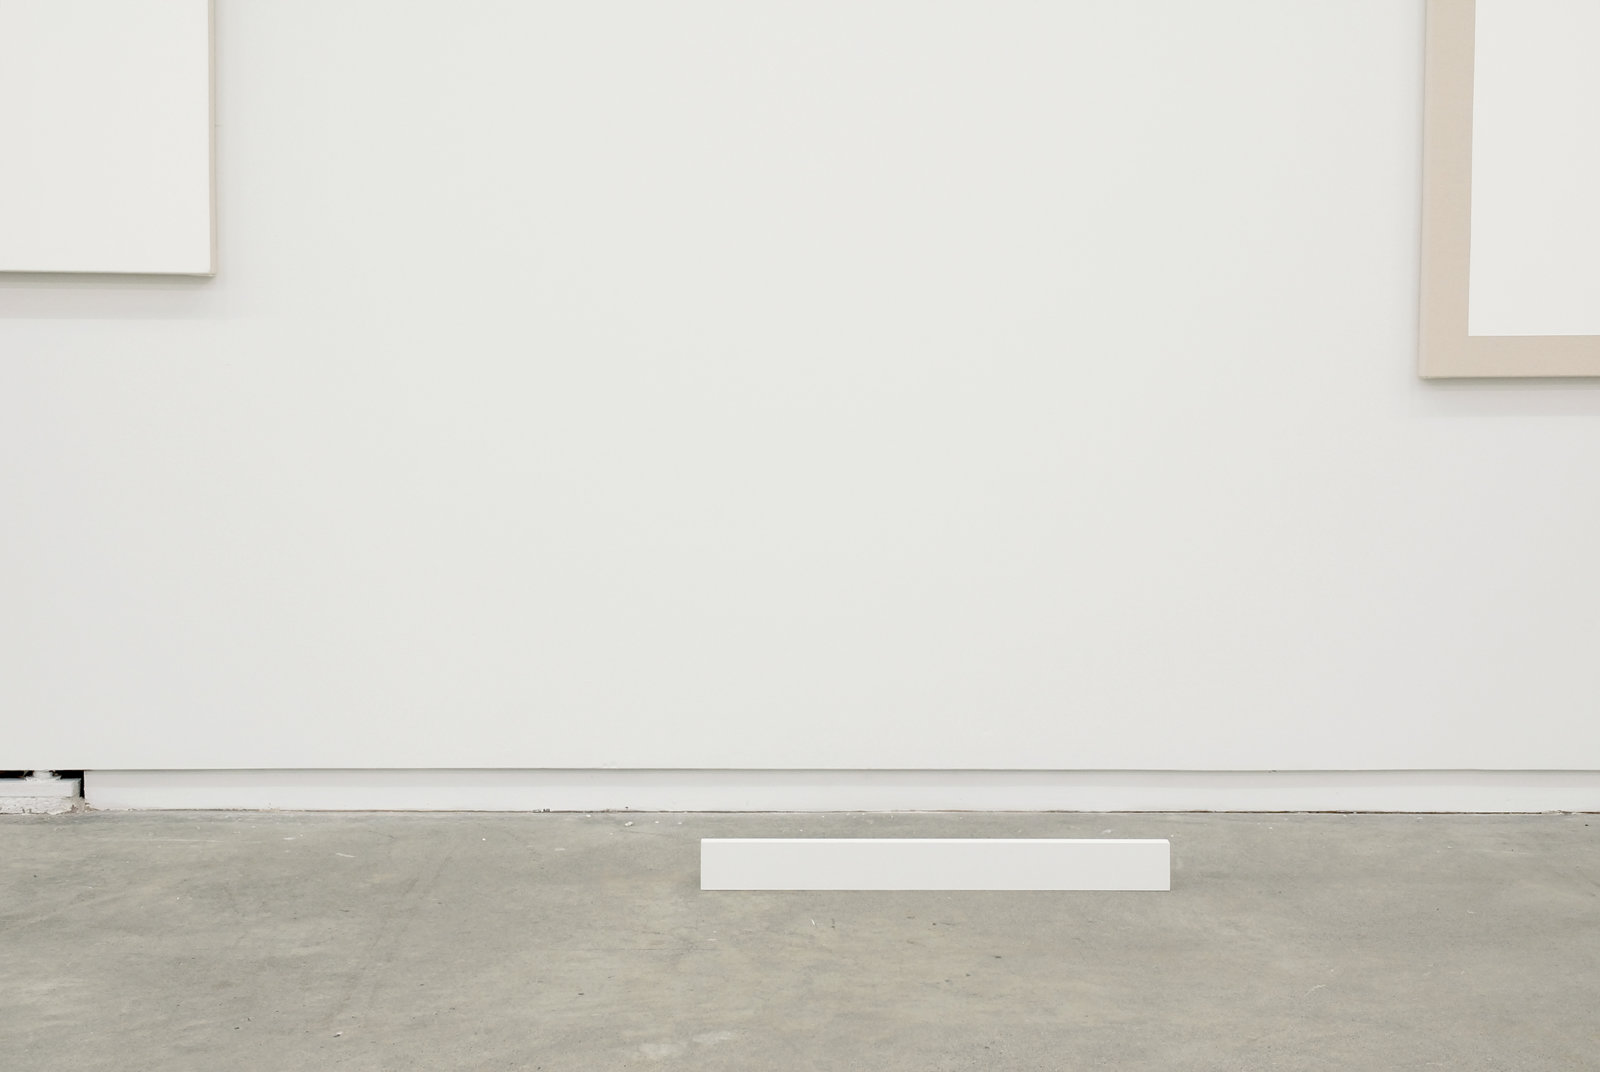 ​Arabella Campbell, The Reveal Works, 2007, c-prints and sculpture, dimensions variable by 